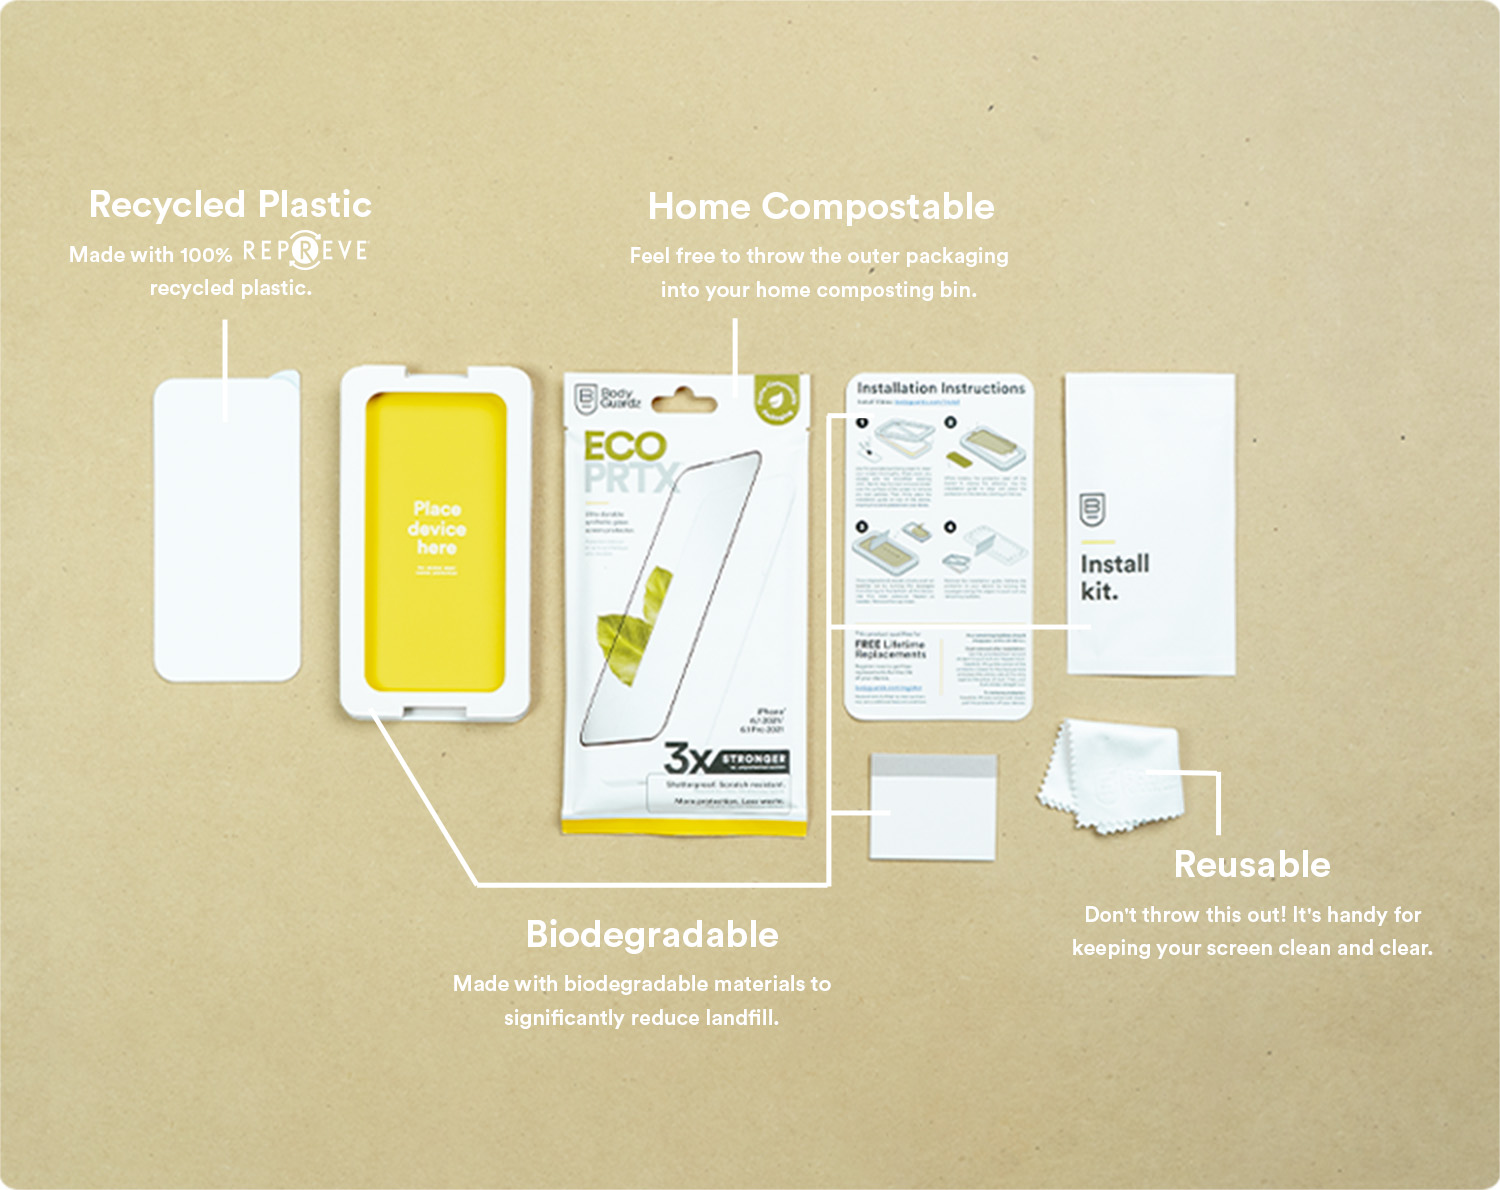 ECO PRTX uses responsible, eco friendly packaging.